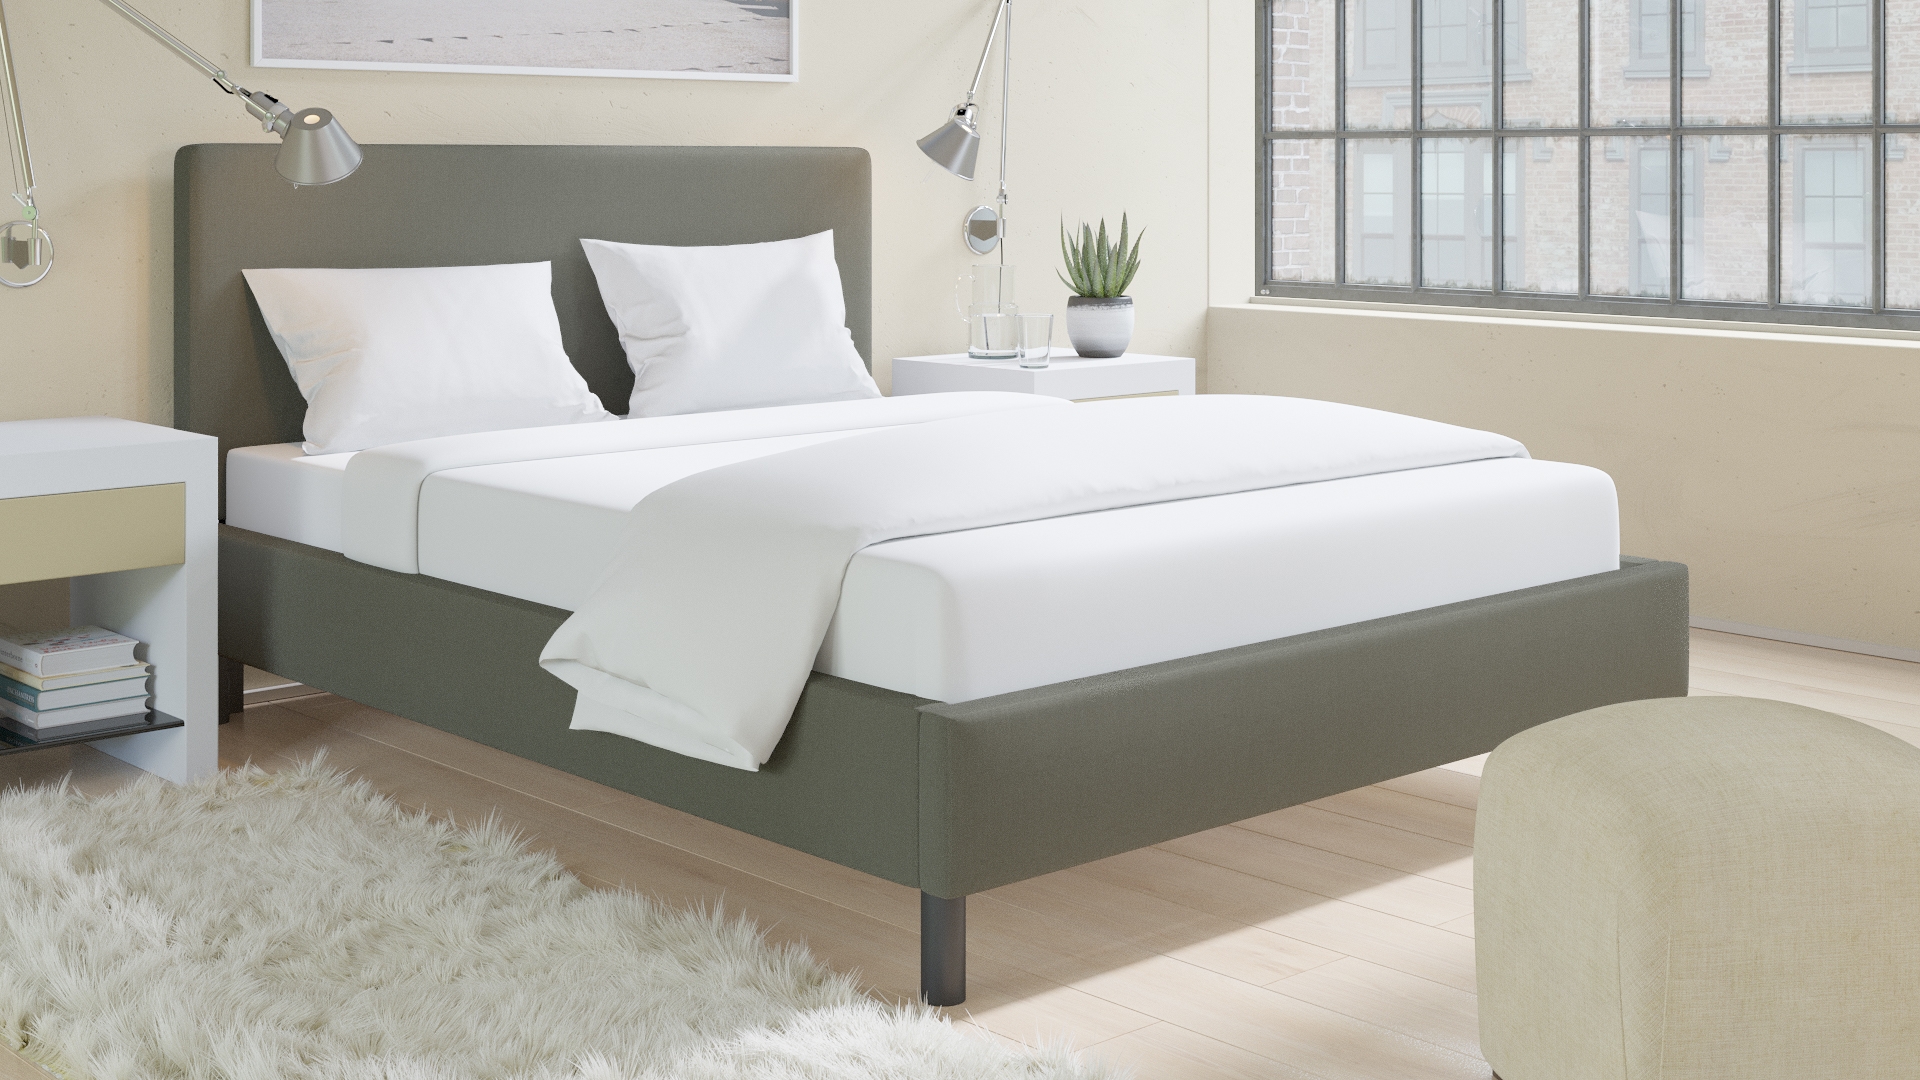 Tailored Platform Bed, Putty Everyday Linen, Queen - Image 2